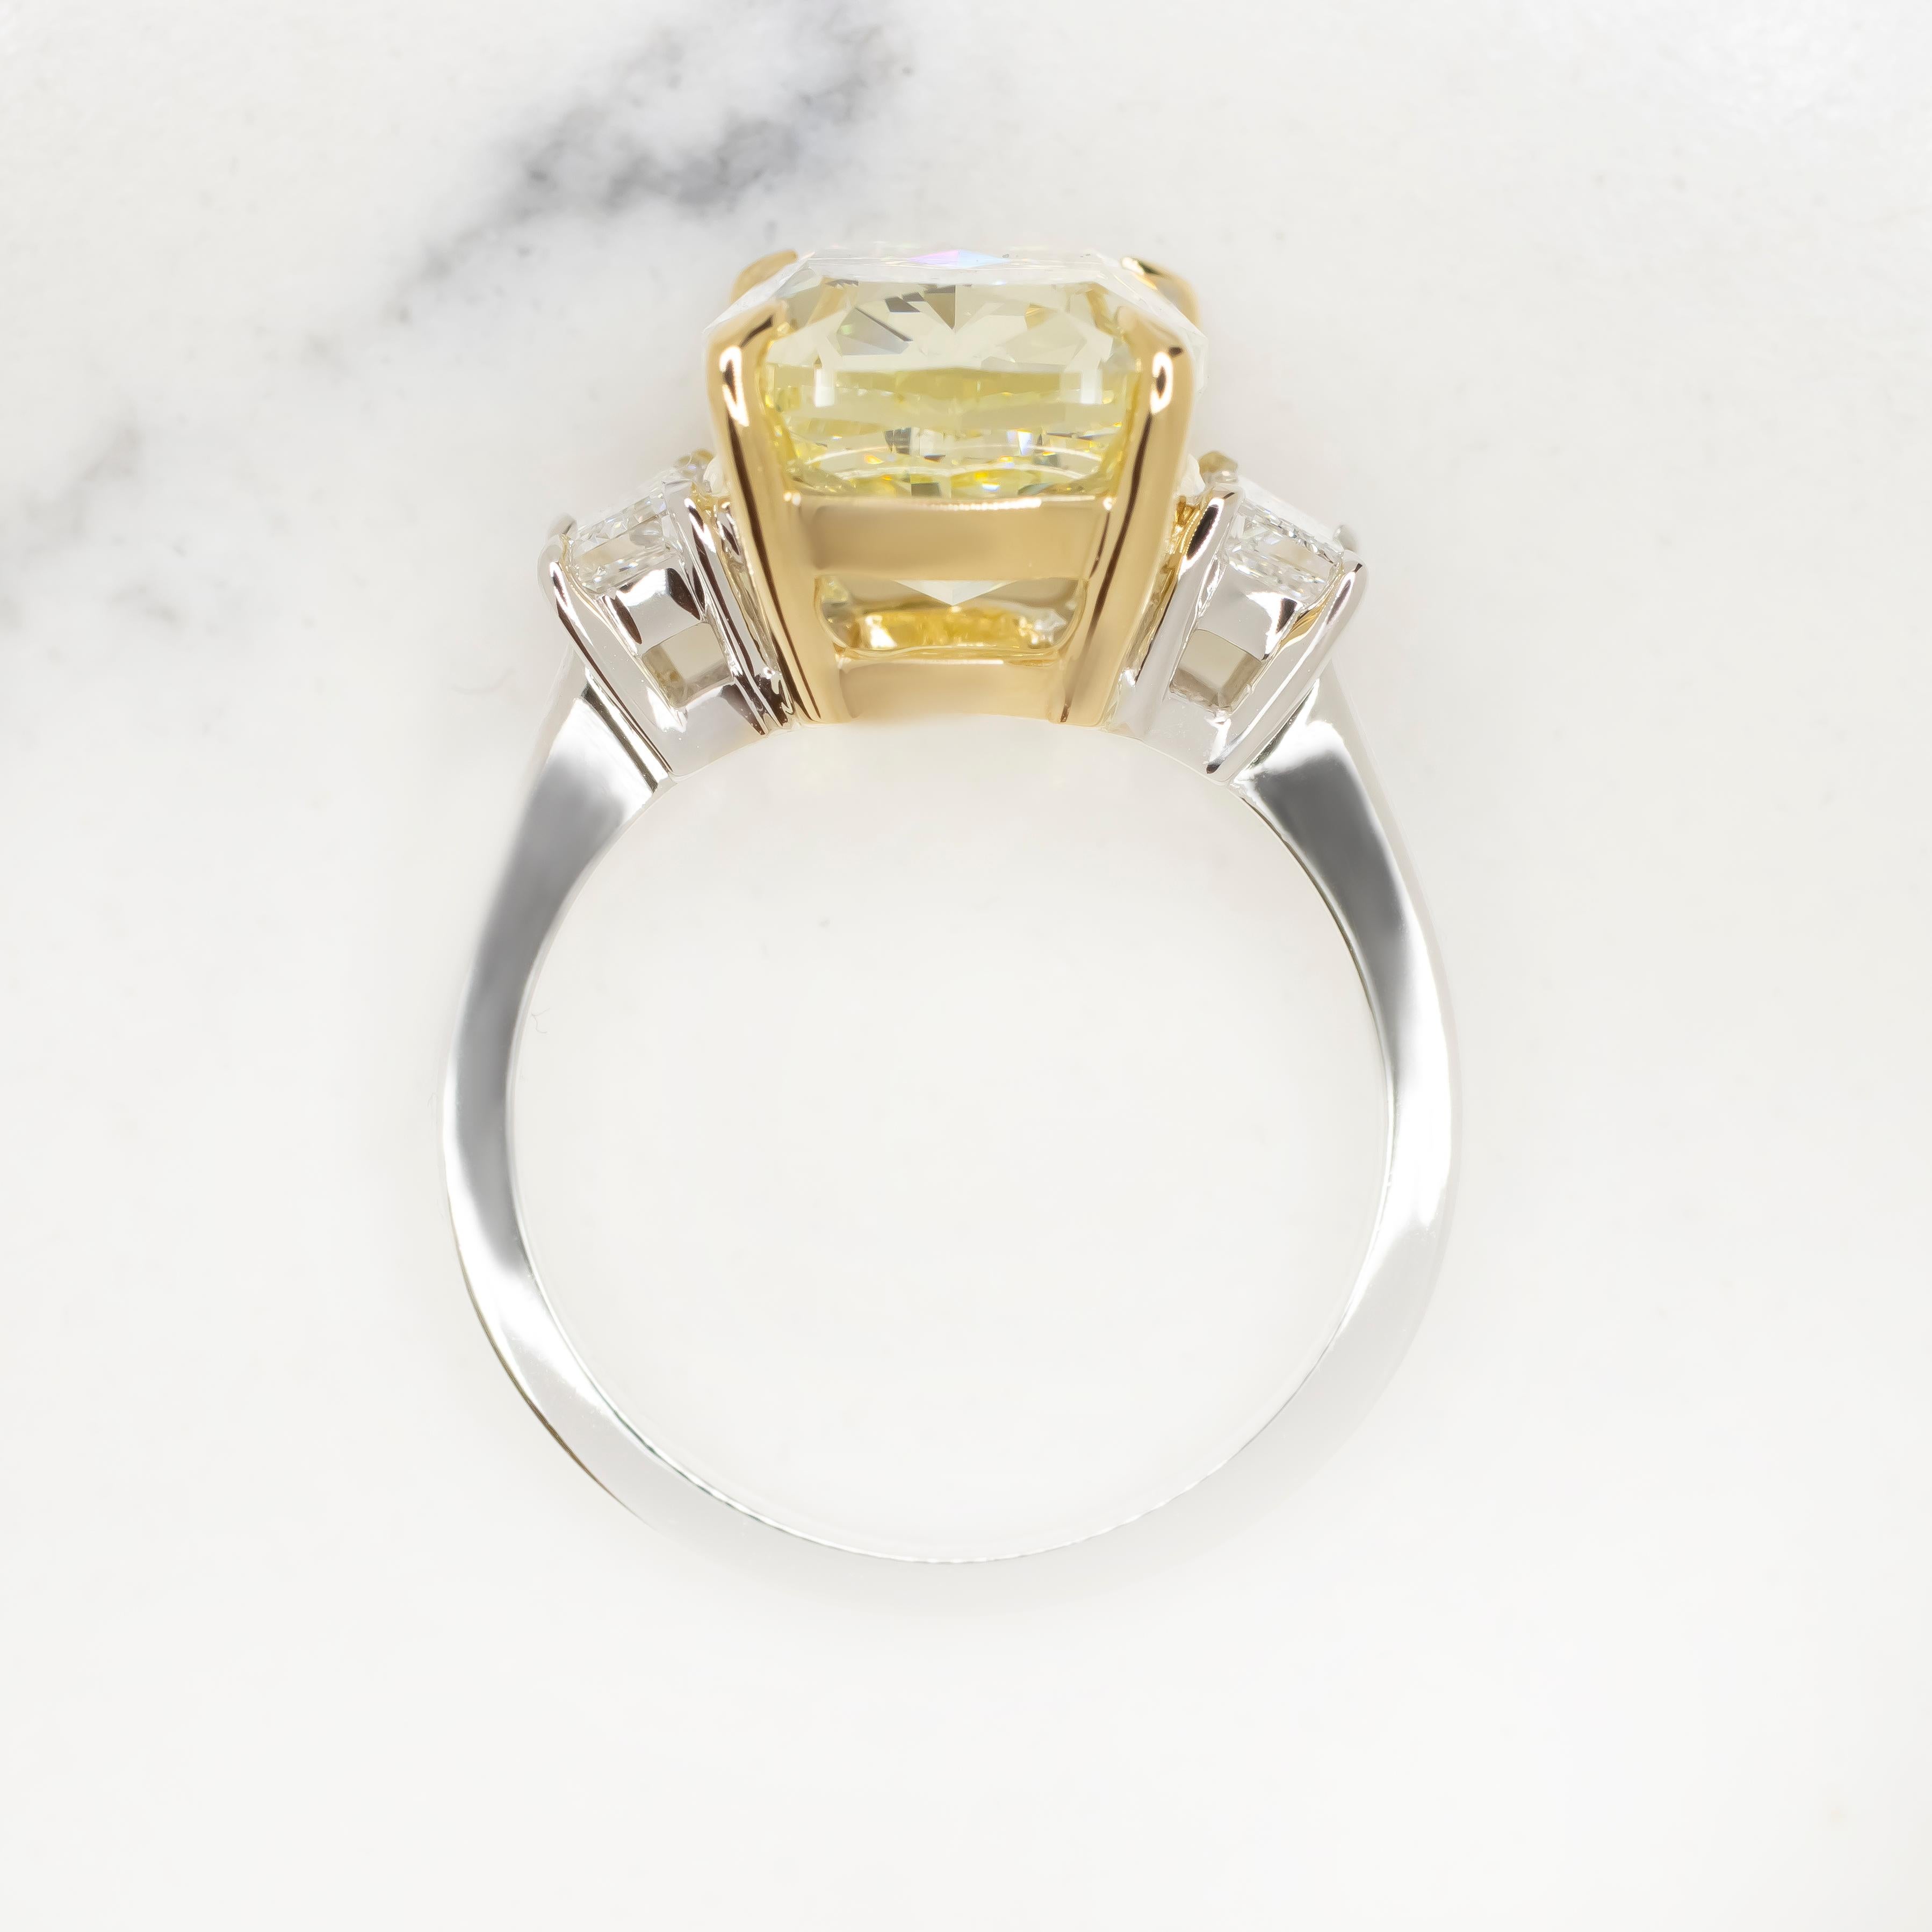 Contemporary GIA Certified 12.34 Carat Fancy Light Yellow Cushion Cut Diamond Ring For Sale